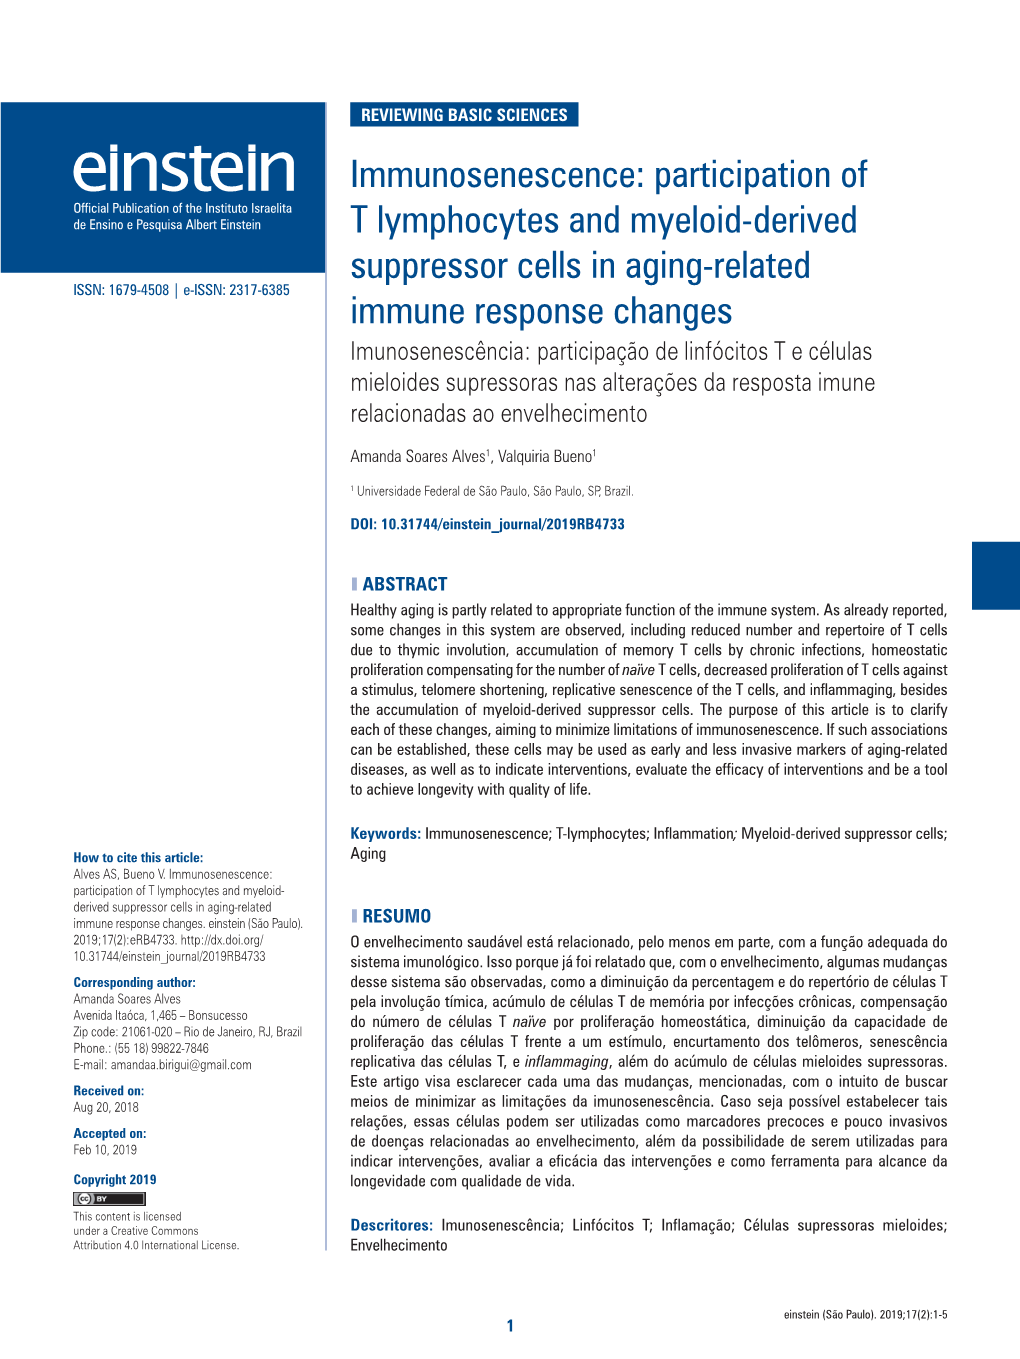 Immunosenescence: Participation of T Lymphocytes and Myeloid-Derived Suppressor Cells in Aging-Related Immune Response Changes